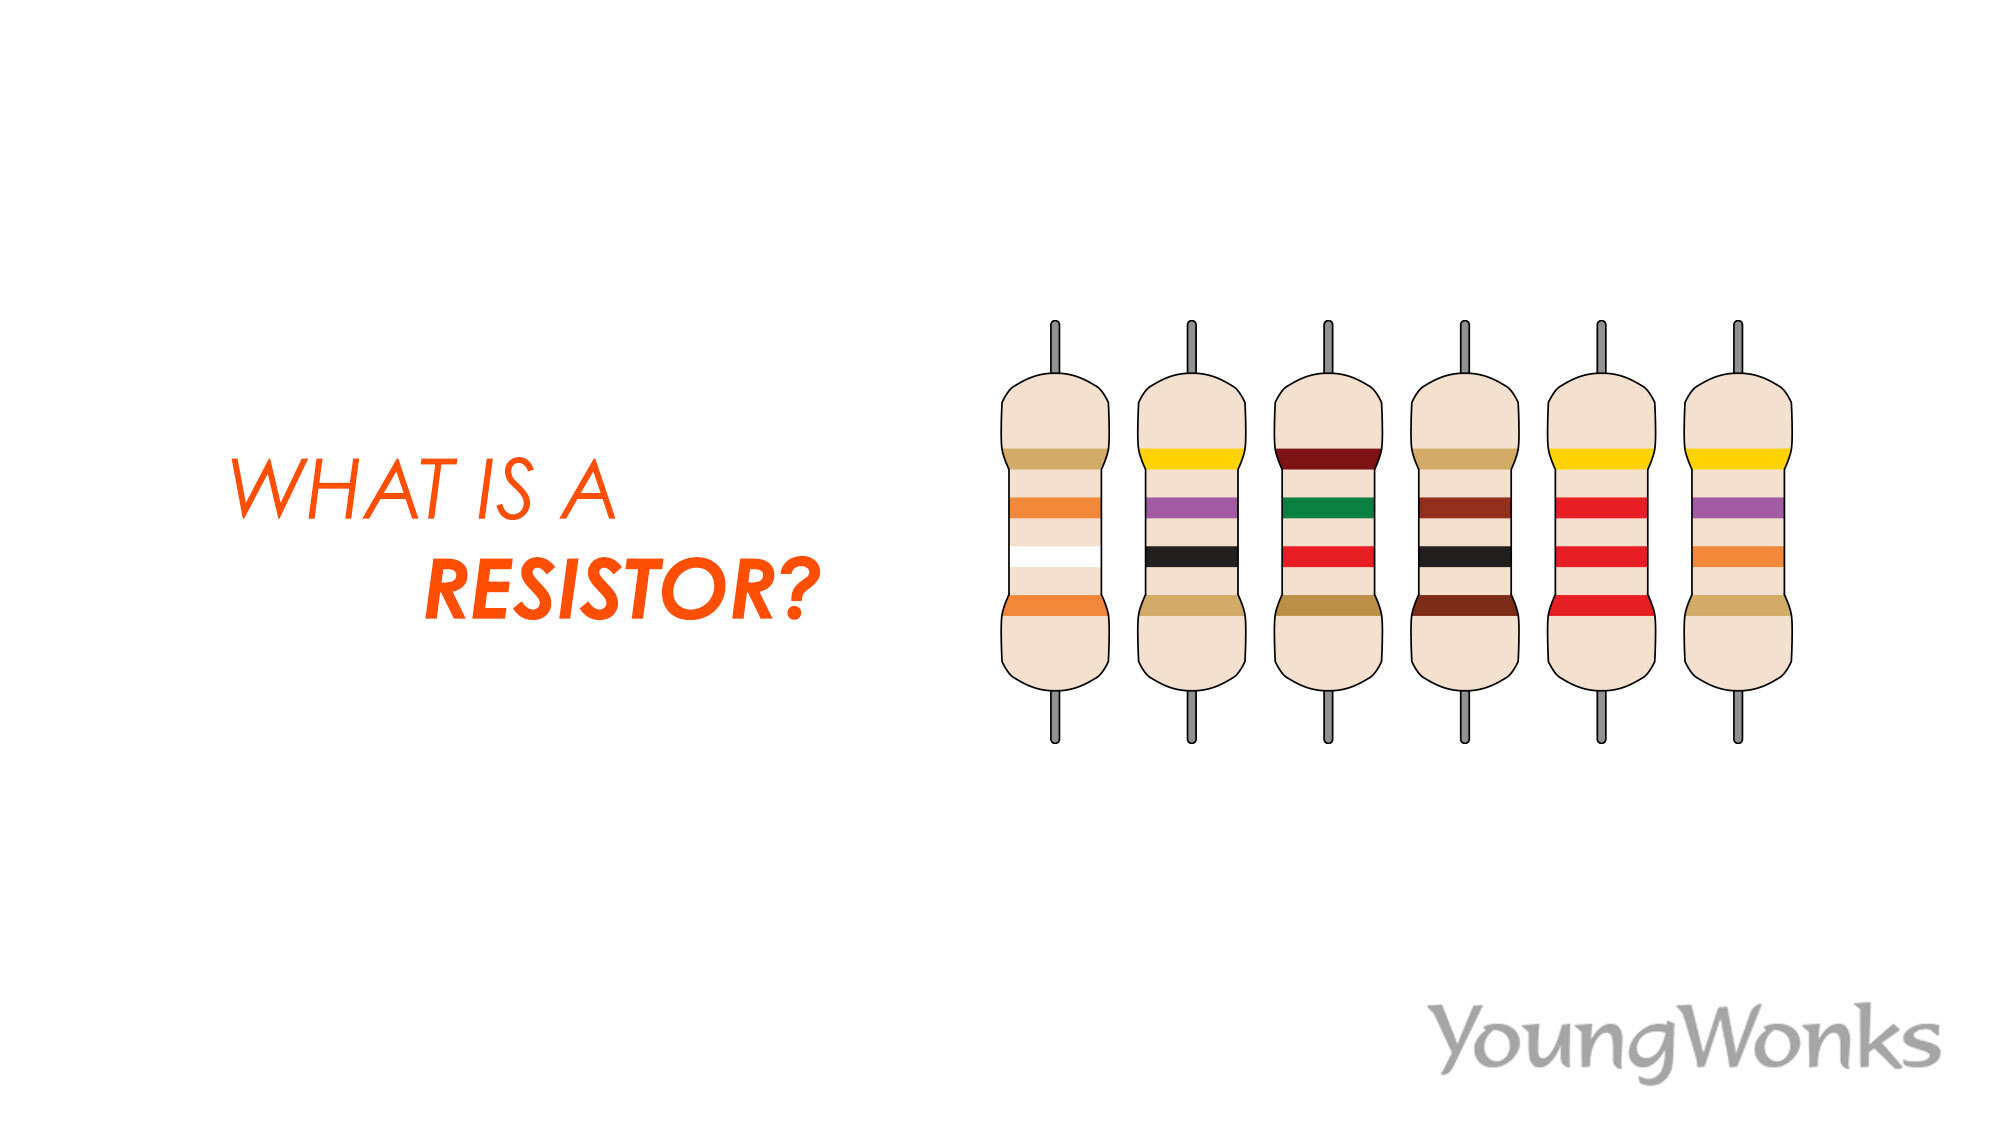 What is the purpose of a resistor in a circuit?